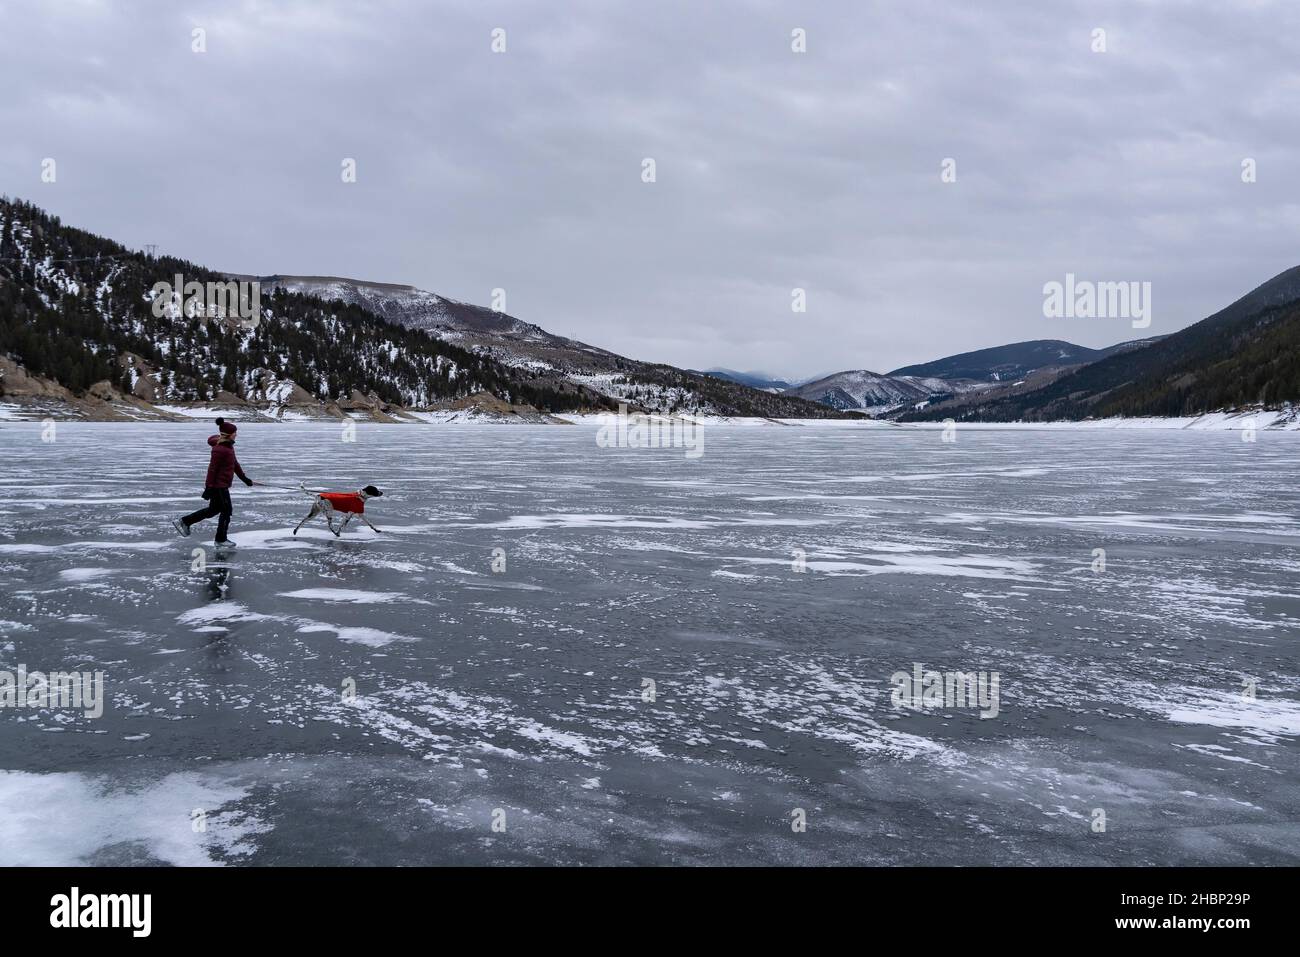 Woman ice skating behind dog on frozen landscape during vacation Stock Photo